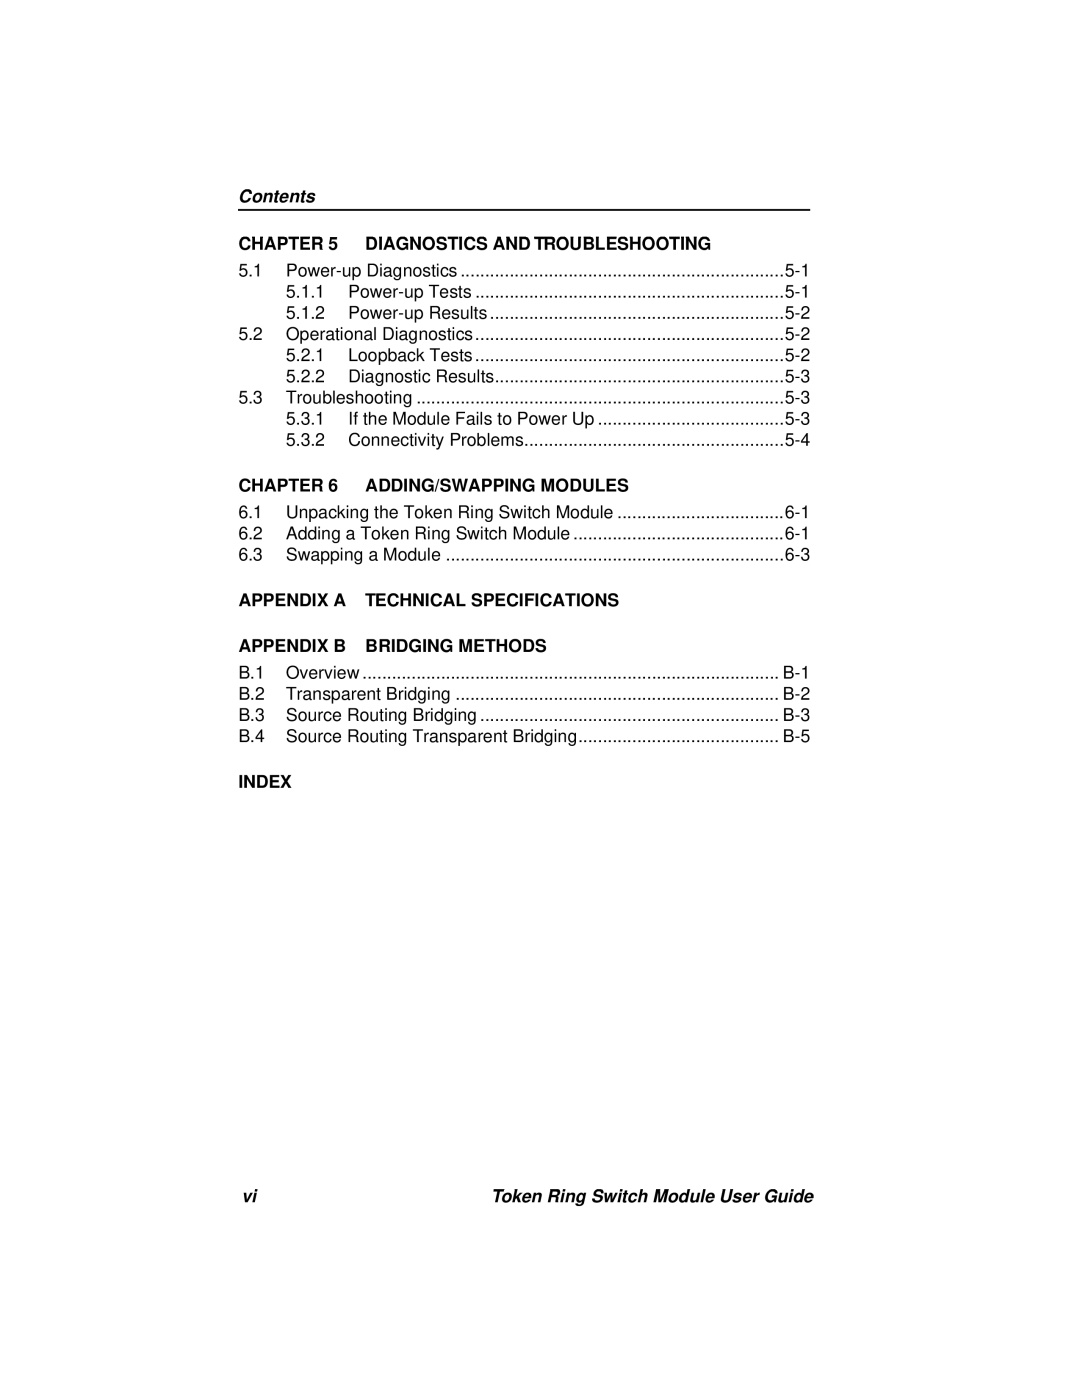 Cabletron Systems 3T02-04 Contents, Diagnostics And Troubleshooting, Chapter, Adding/Swapping Modules, Appendix A, Index 